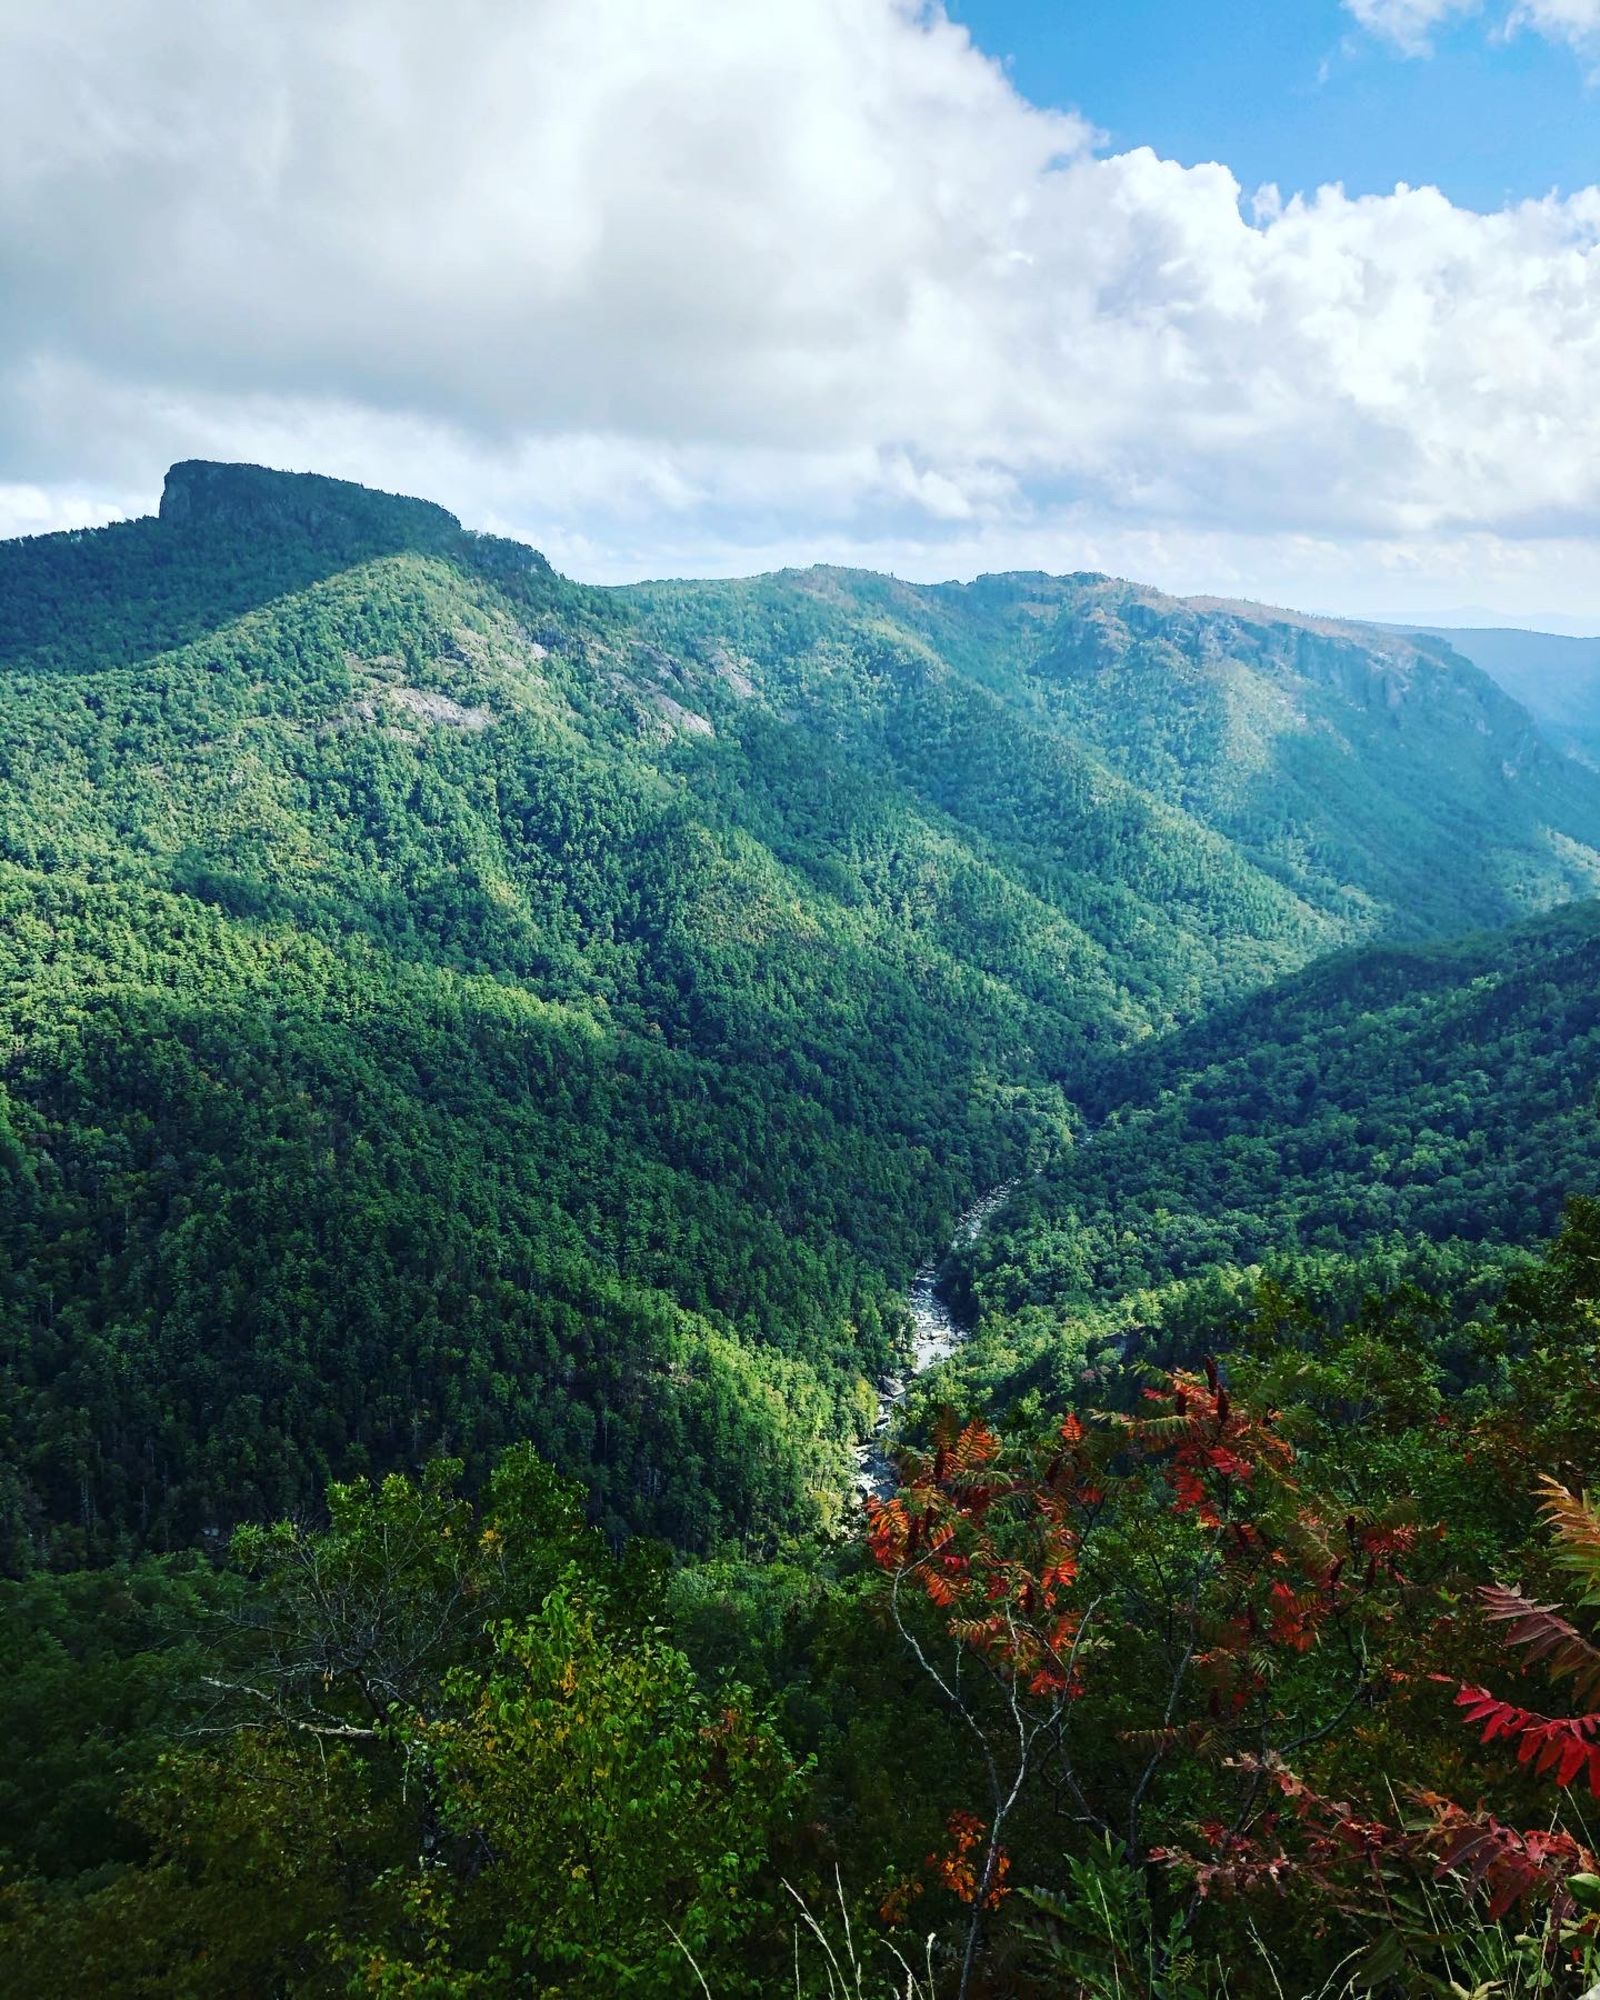 Linville Gorge, with Table Rock on the left